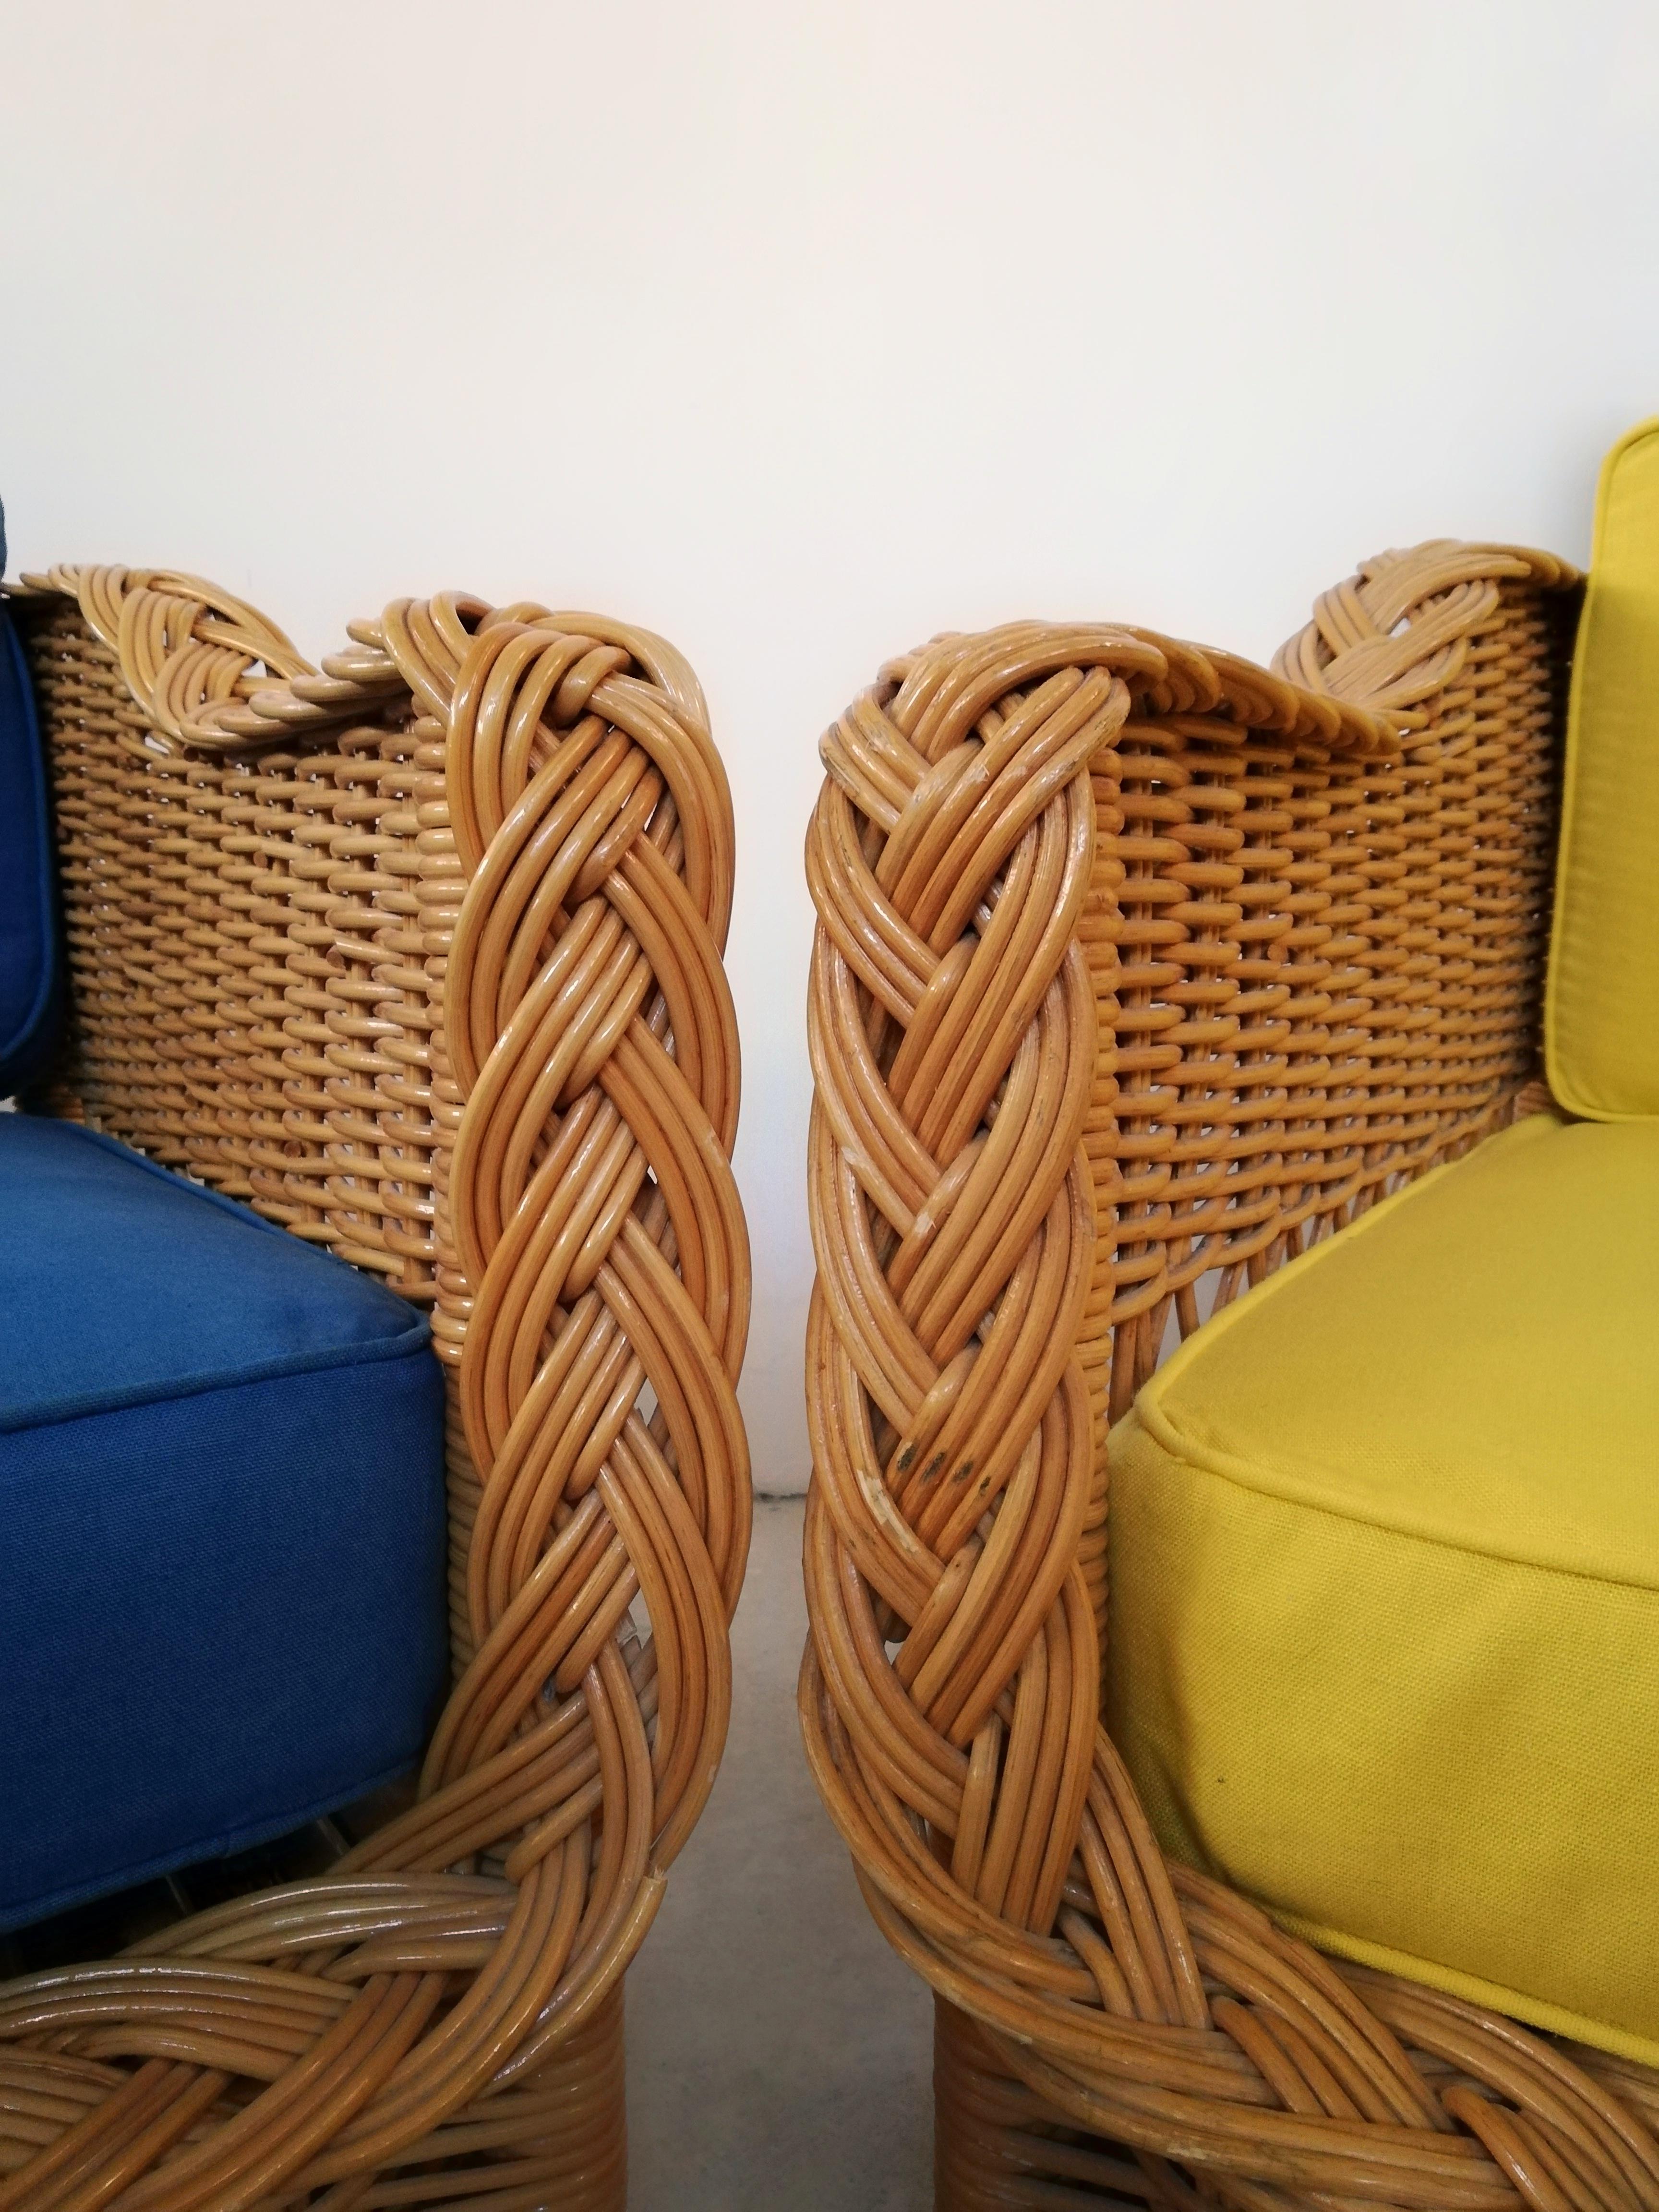 A pair of vintage armchairs handcrafted in Italy between the 1960s and 1970s.
The basket structure of these vintage Armchairs are made with flexed and intertwined willow cane while the seat is in beechwood and rattan canes.
The decorative braid